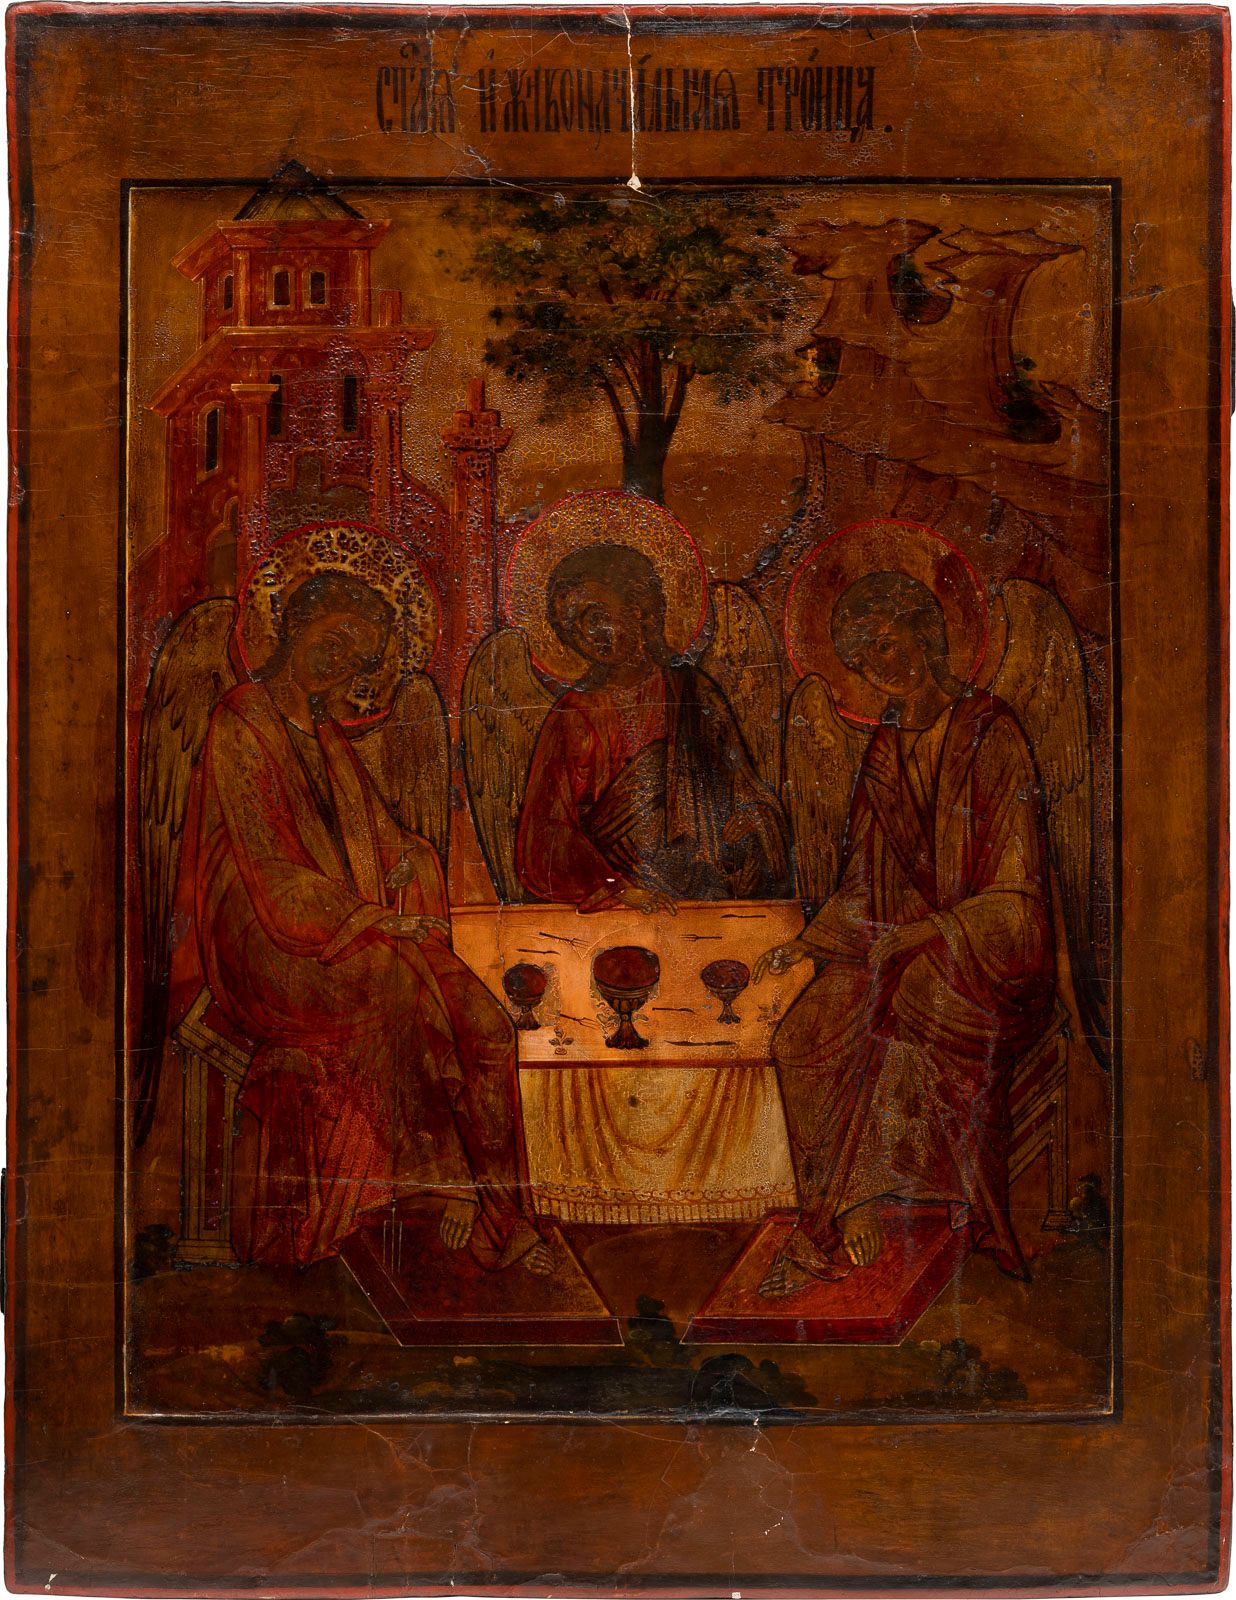 A MONUMENTAL ICON SHOWING THE OLD TESTAMENT TRINITY FROM A MONUMENTALE IKONE MIT&hellip;